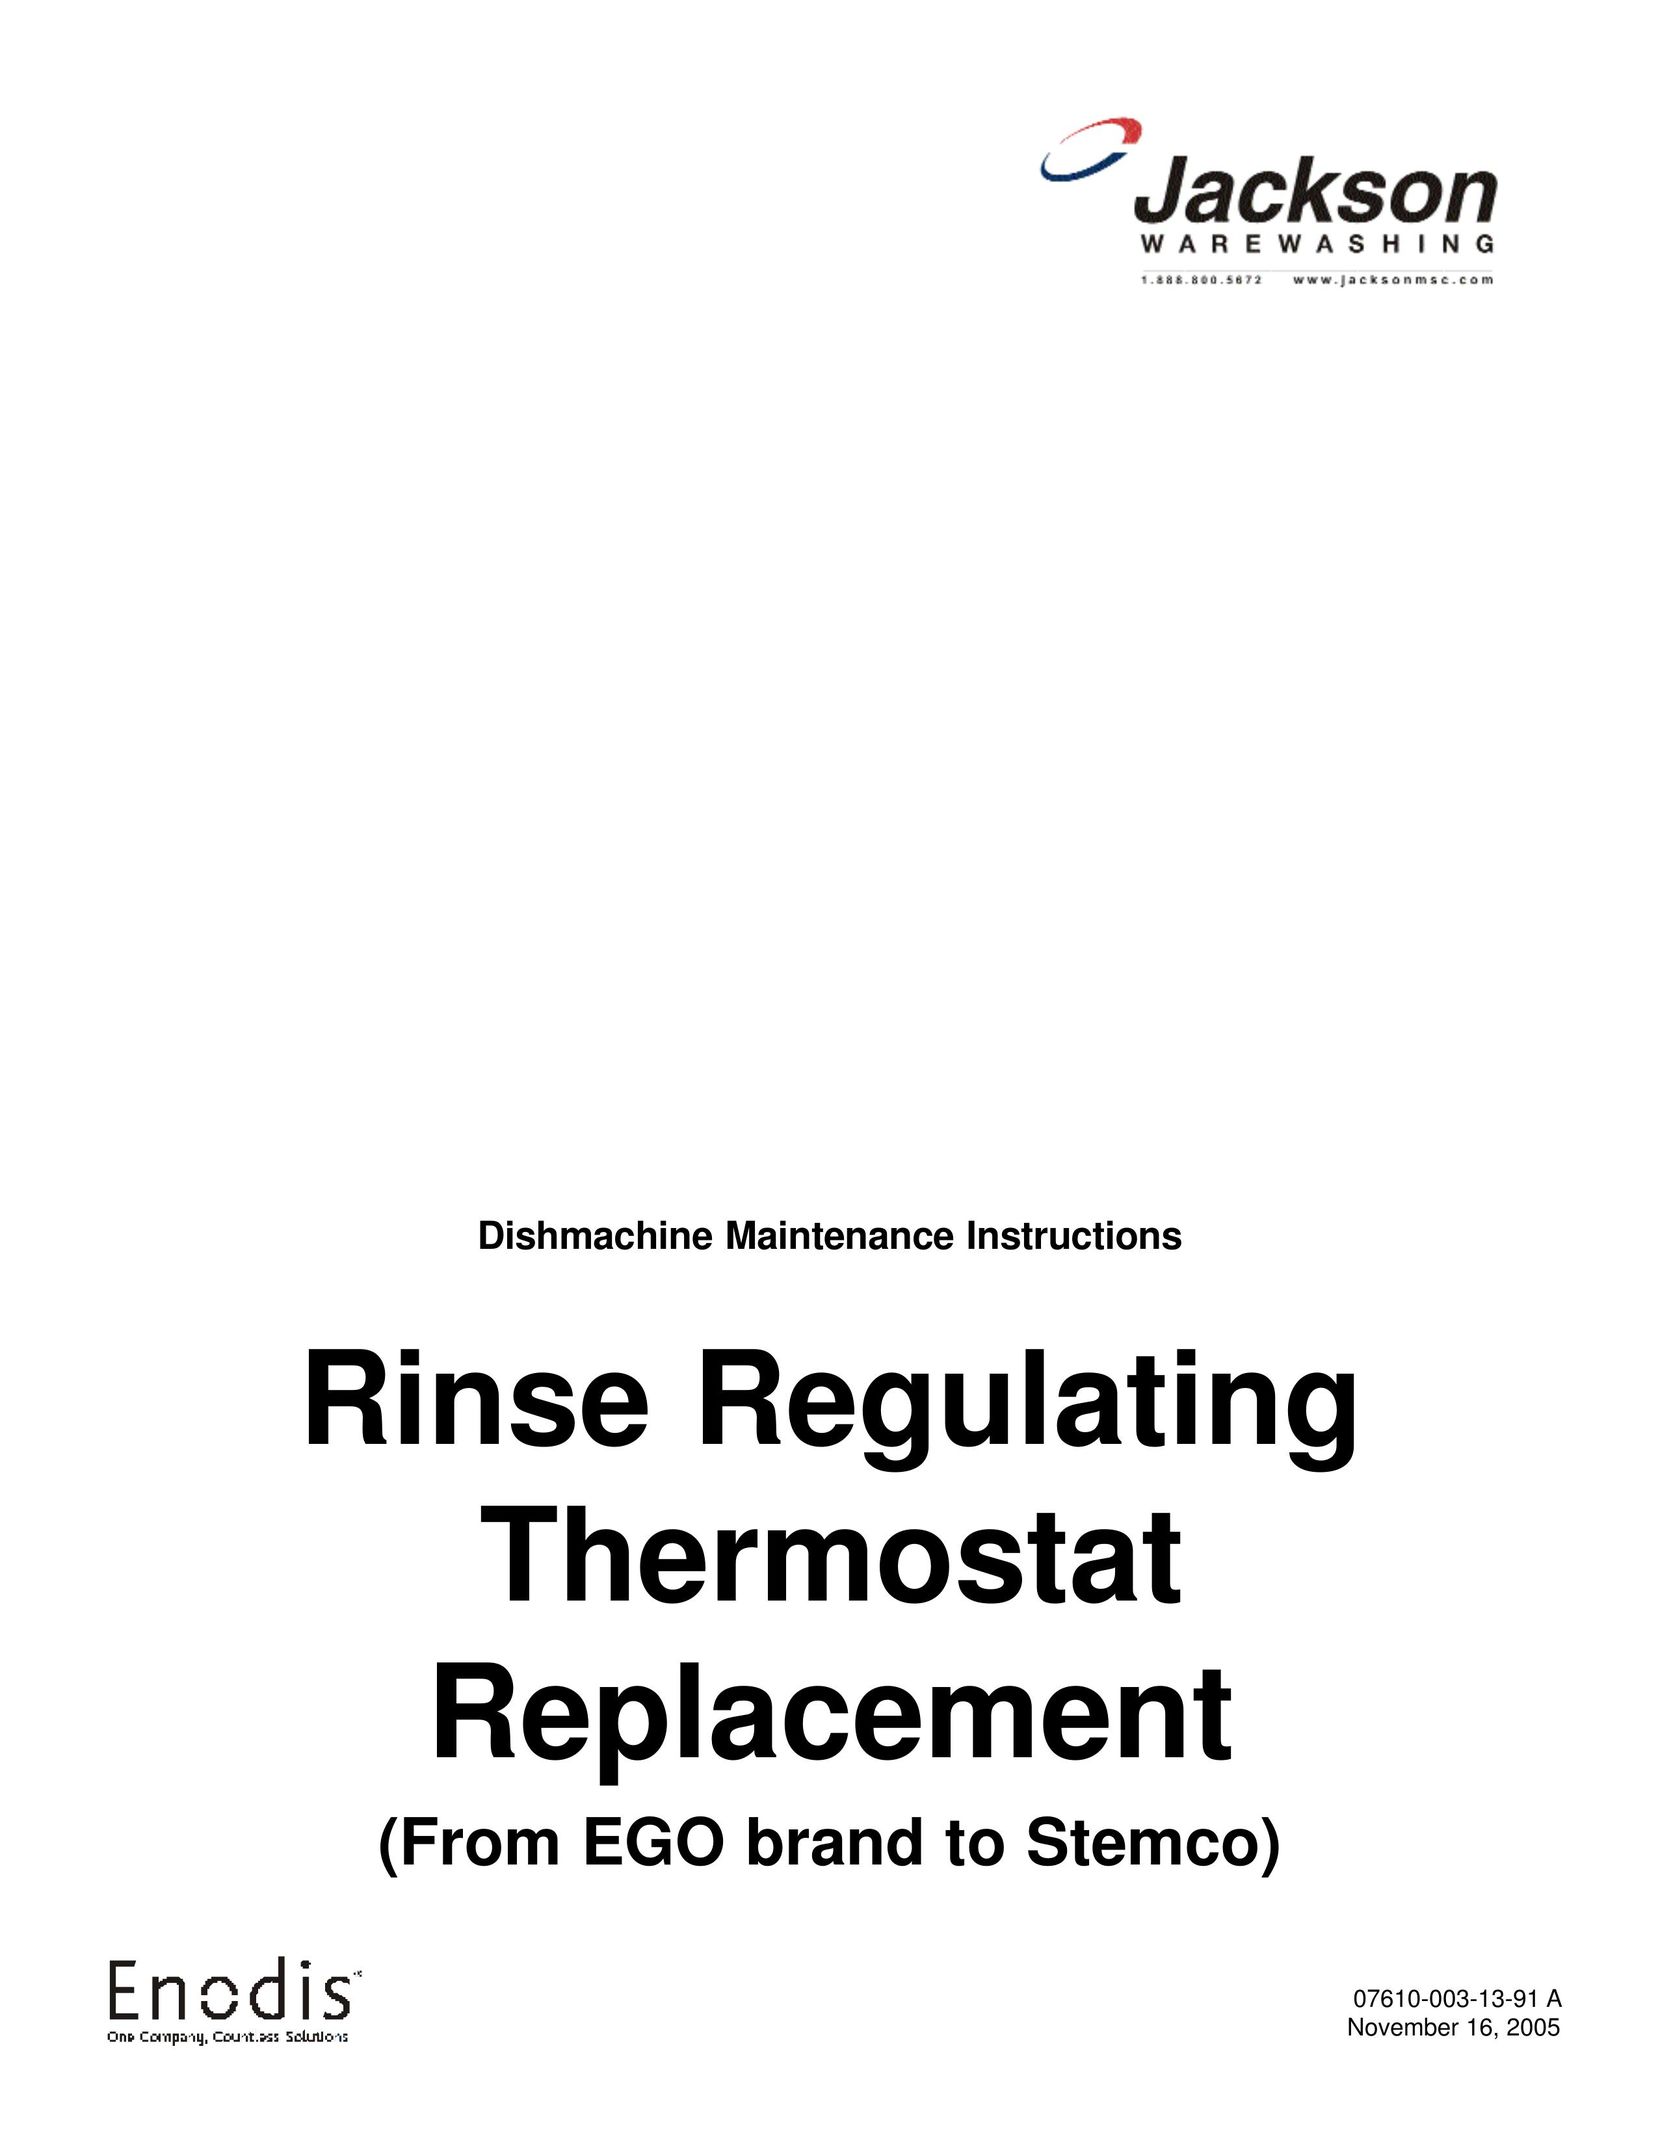 Jackson Rinse Regulating Thermostat Replacement Thermostat User Manual